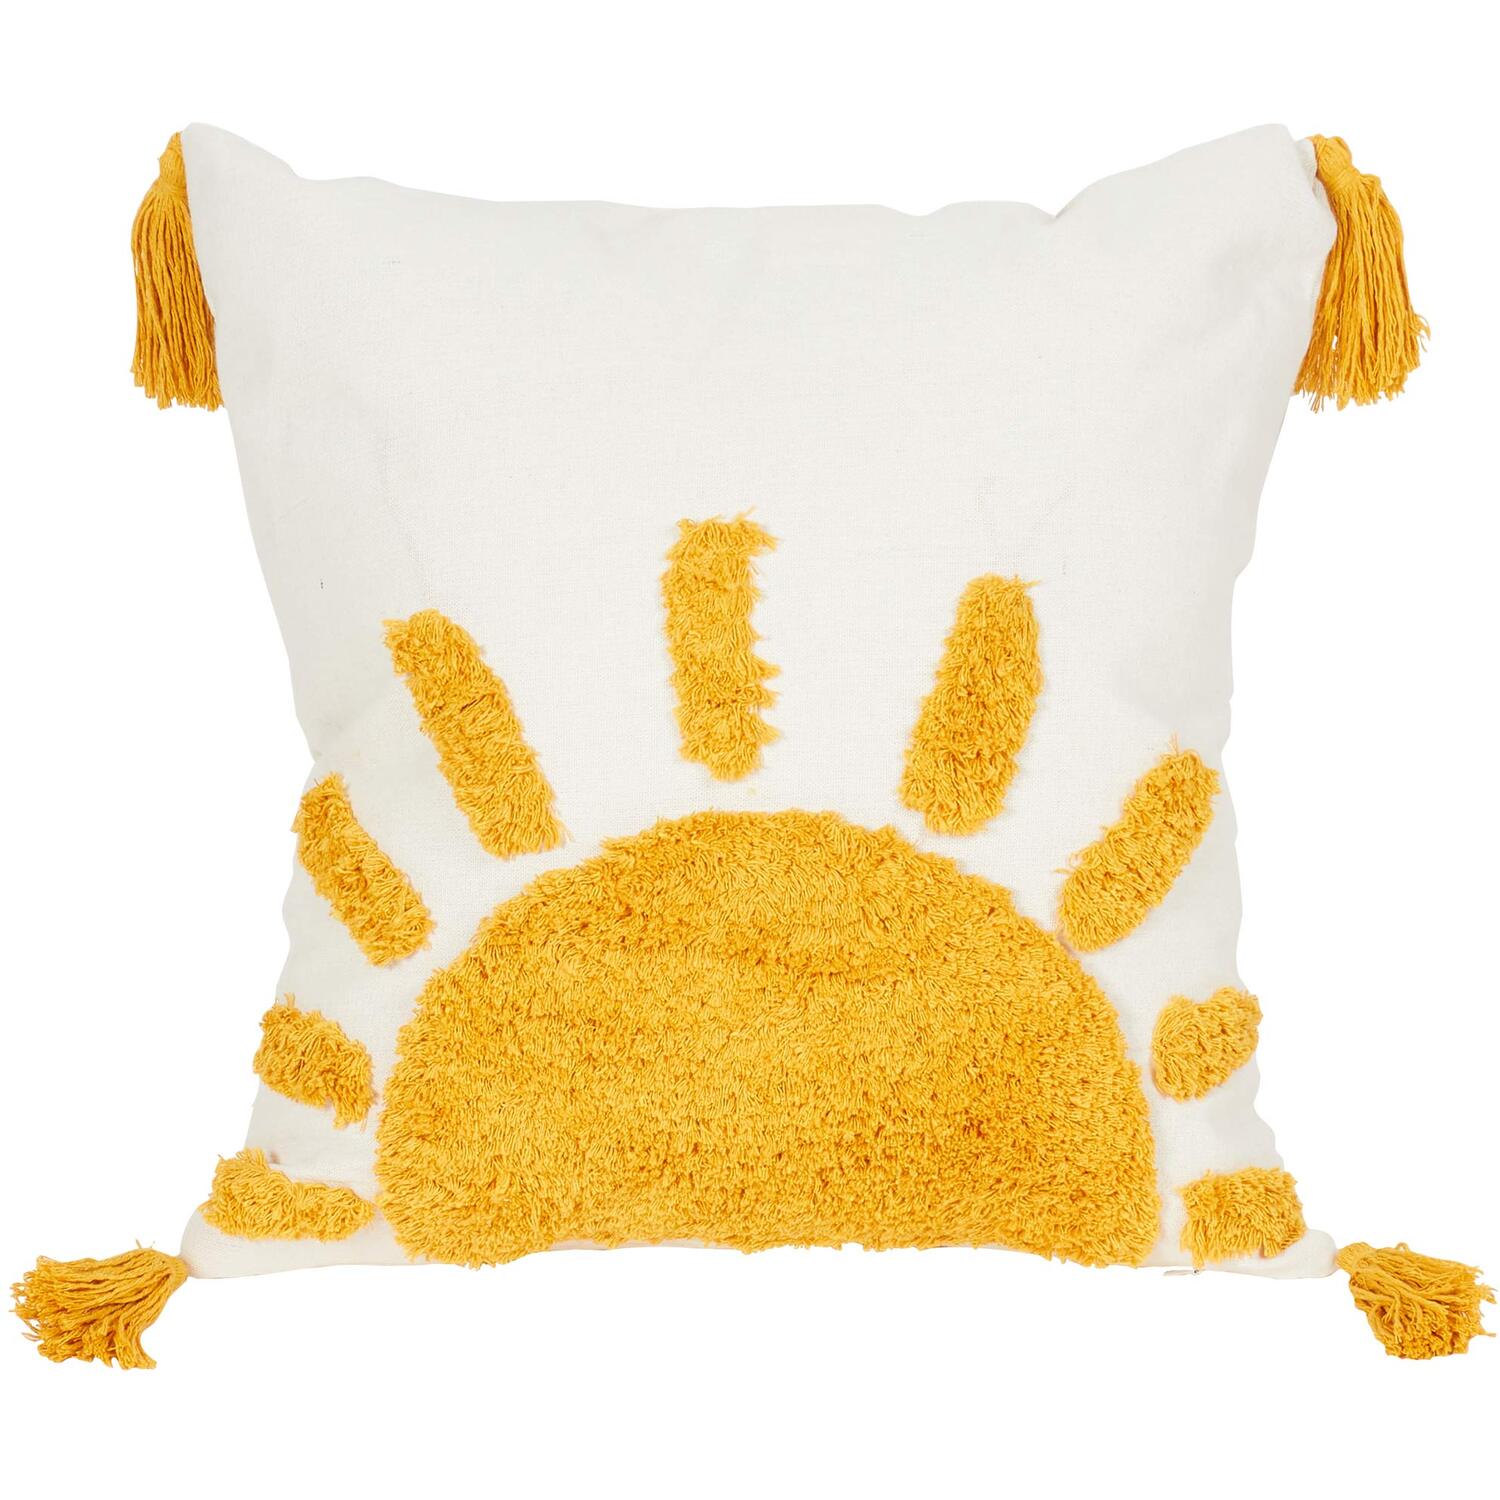 Soleil Tufted Cushion - Yellow Image 1